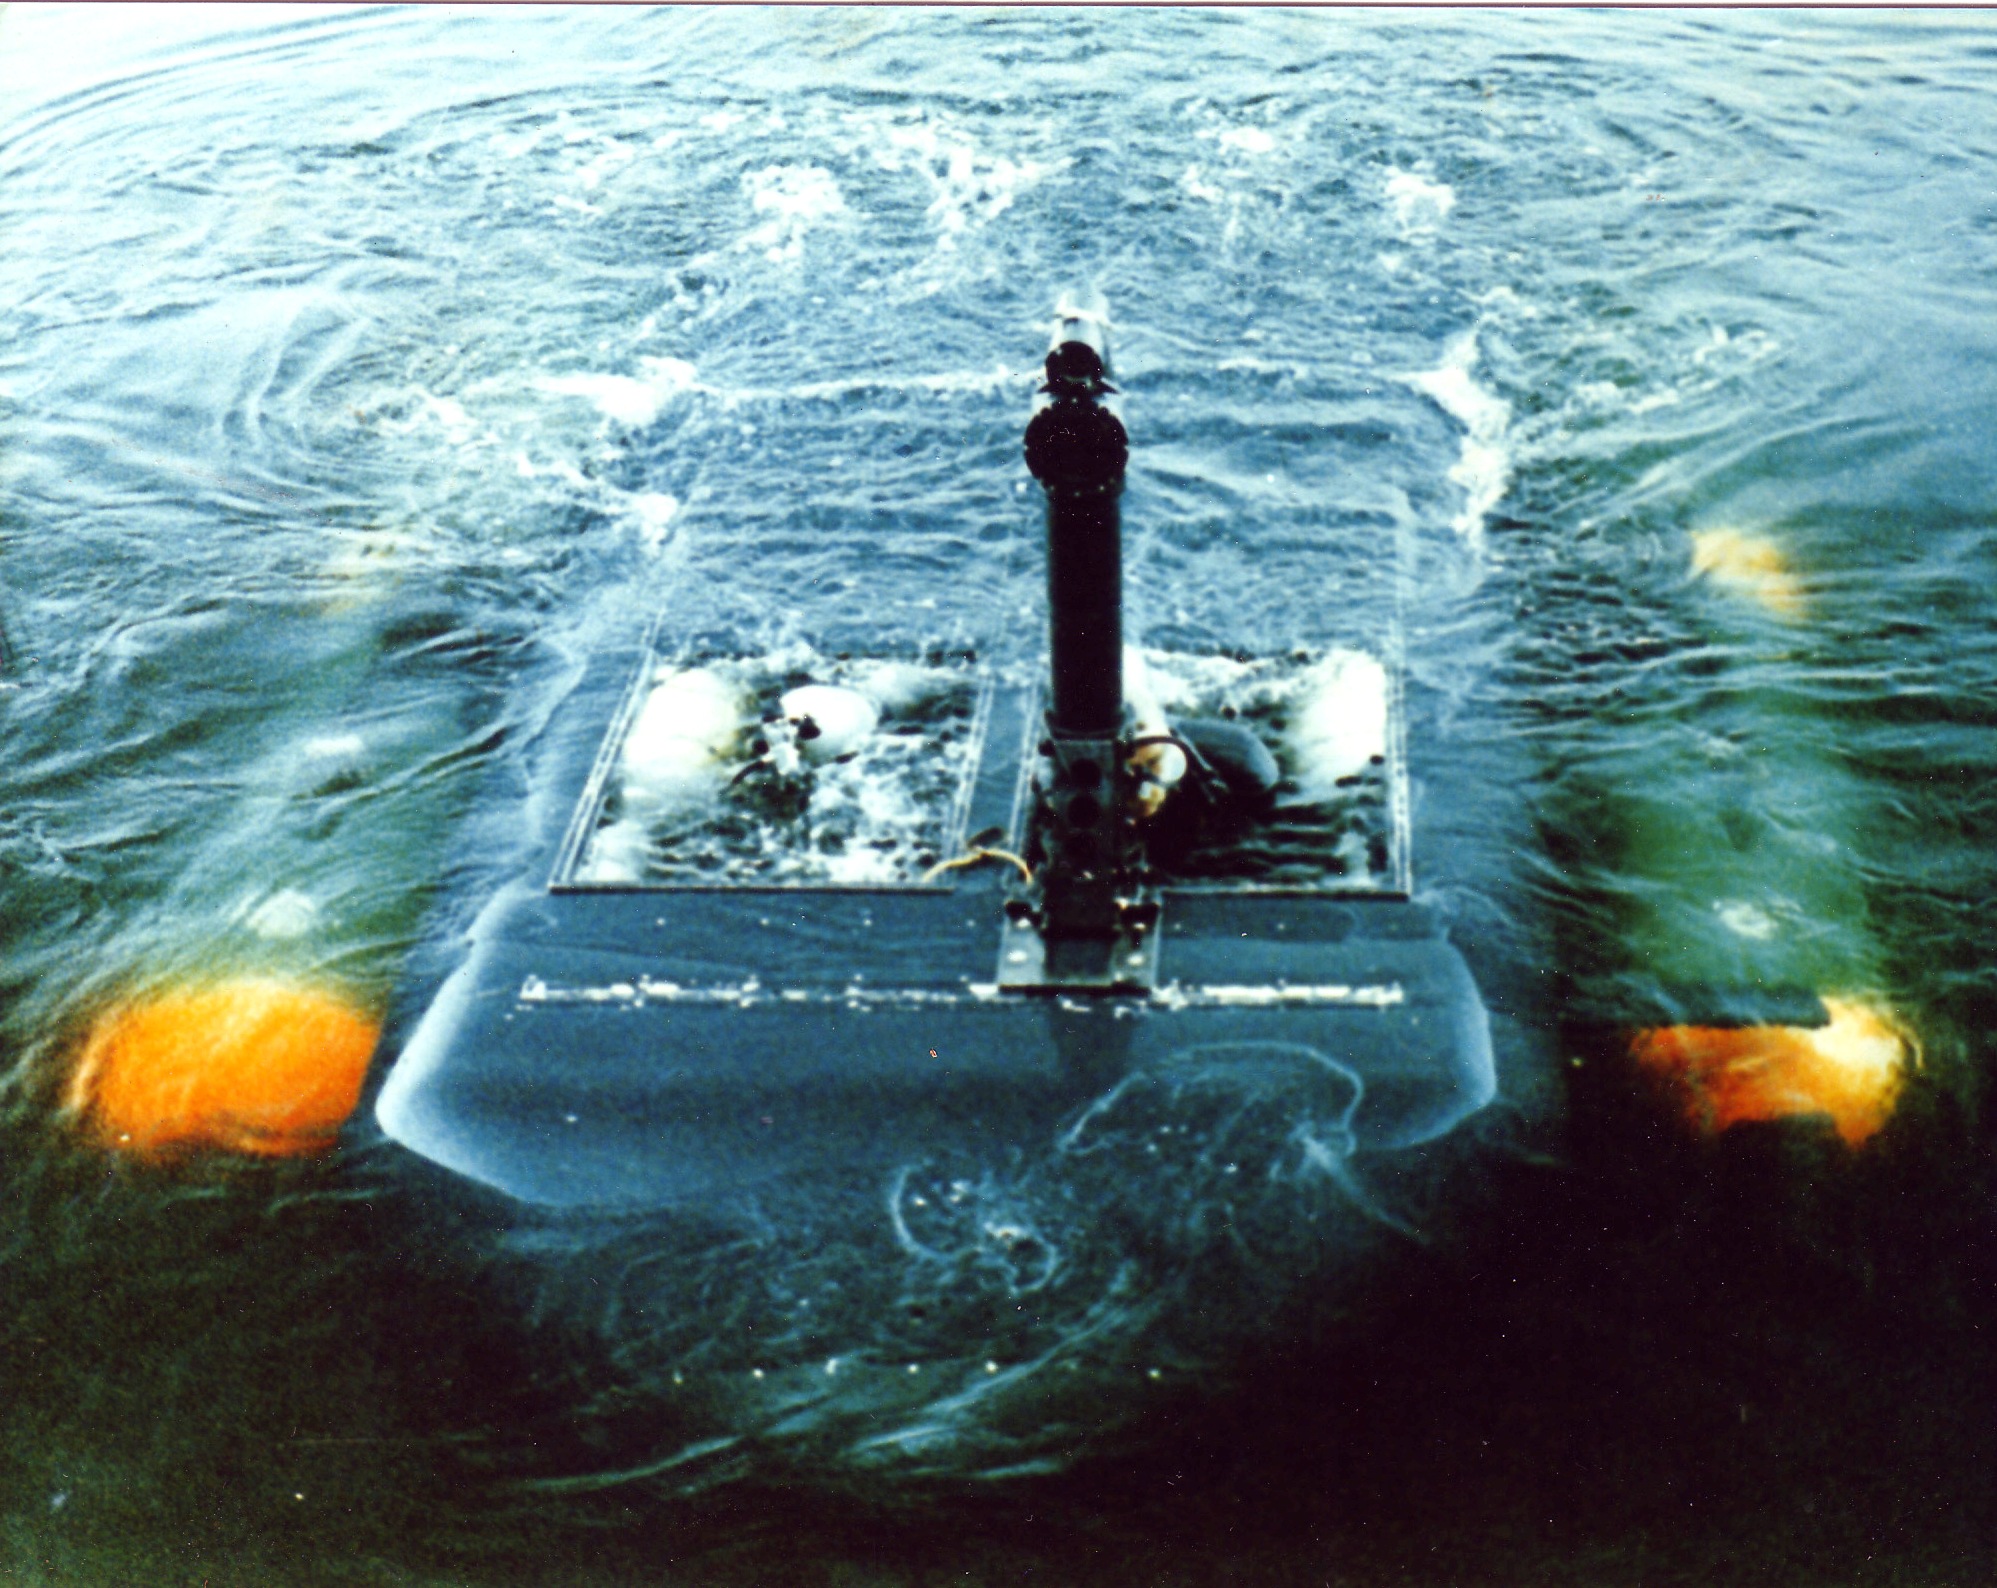 The Standoff Weapon Assembly (SWA) on the surface, periscope up and in the firing position